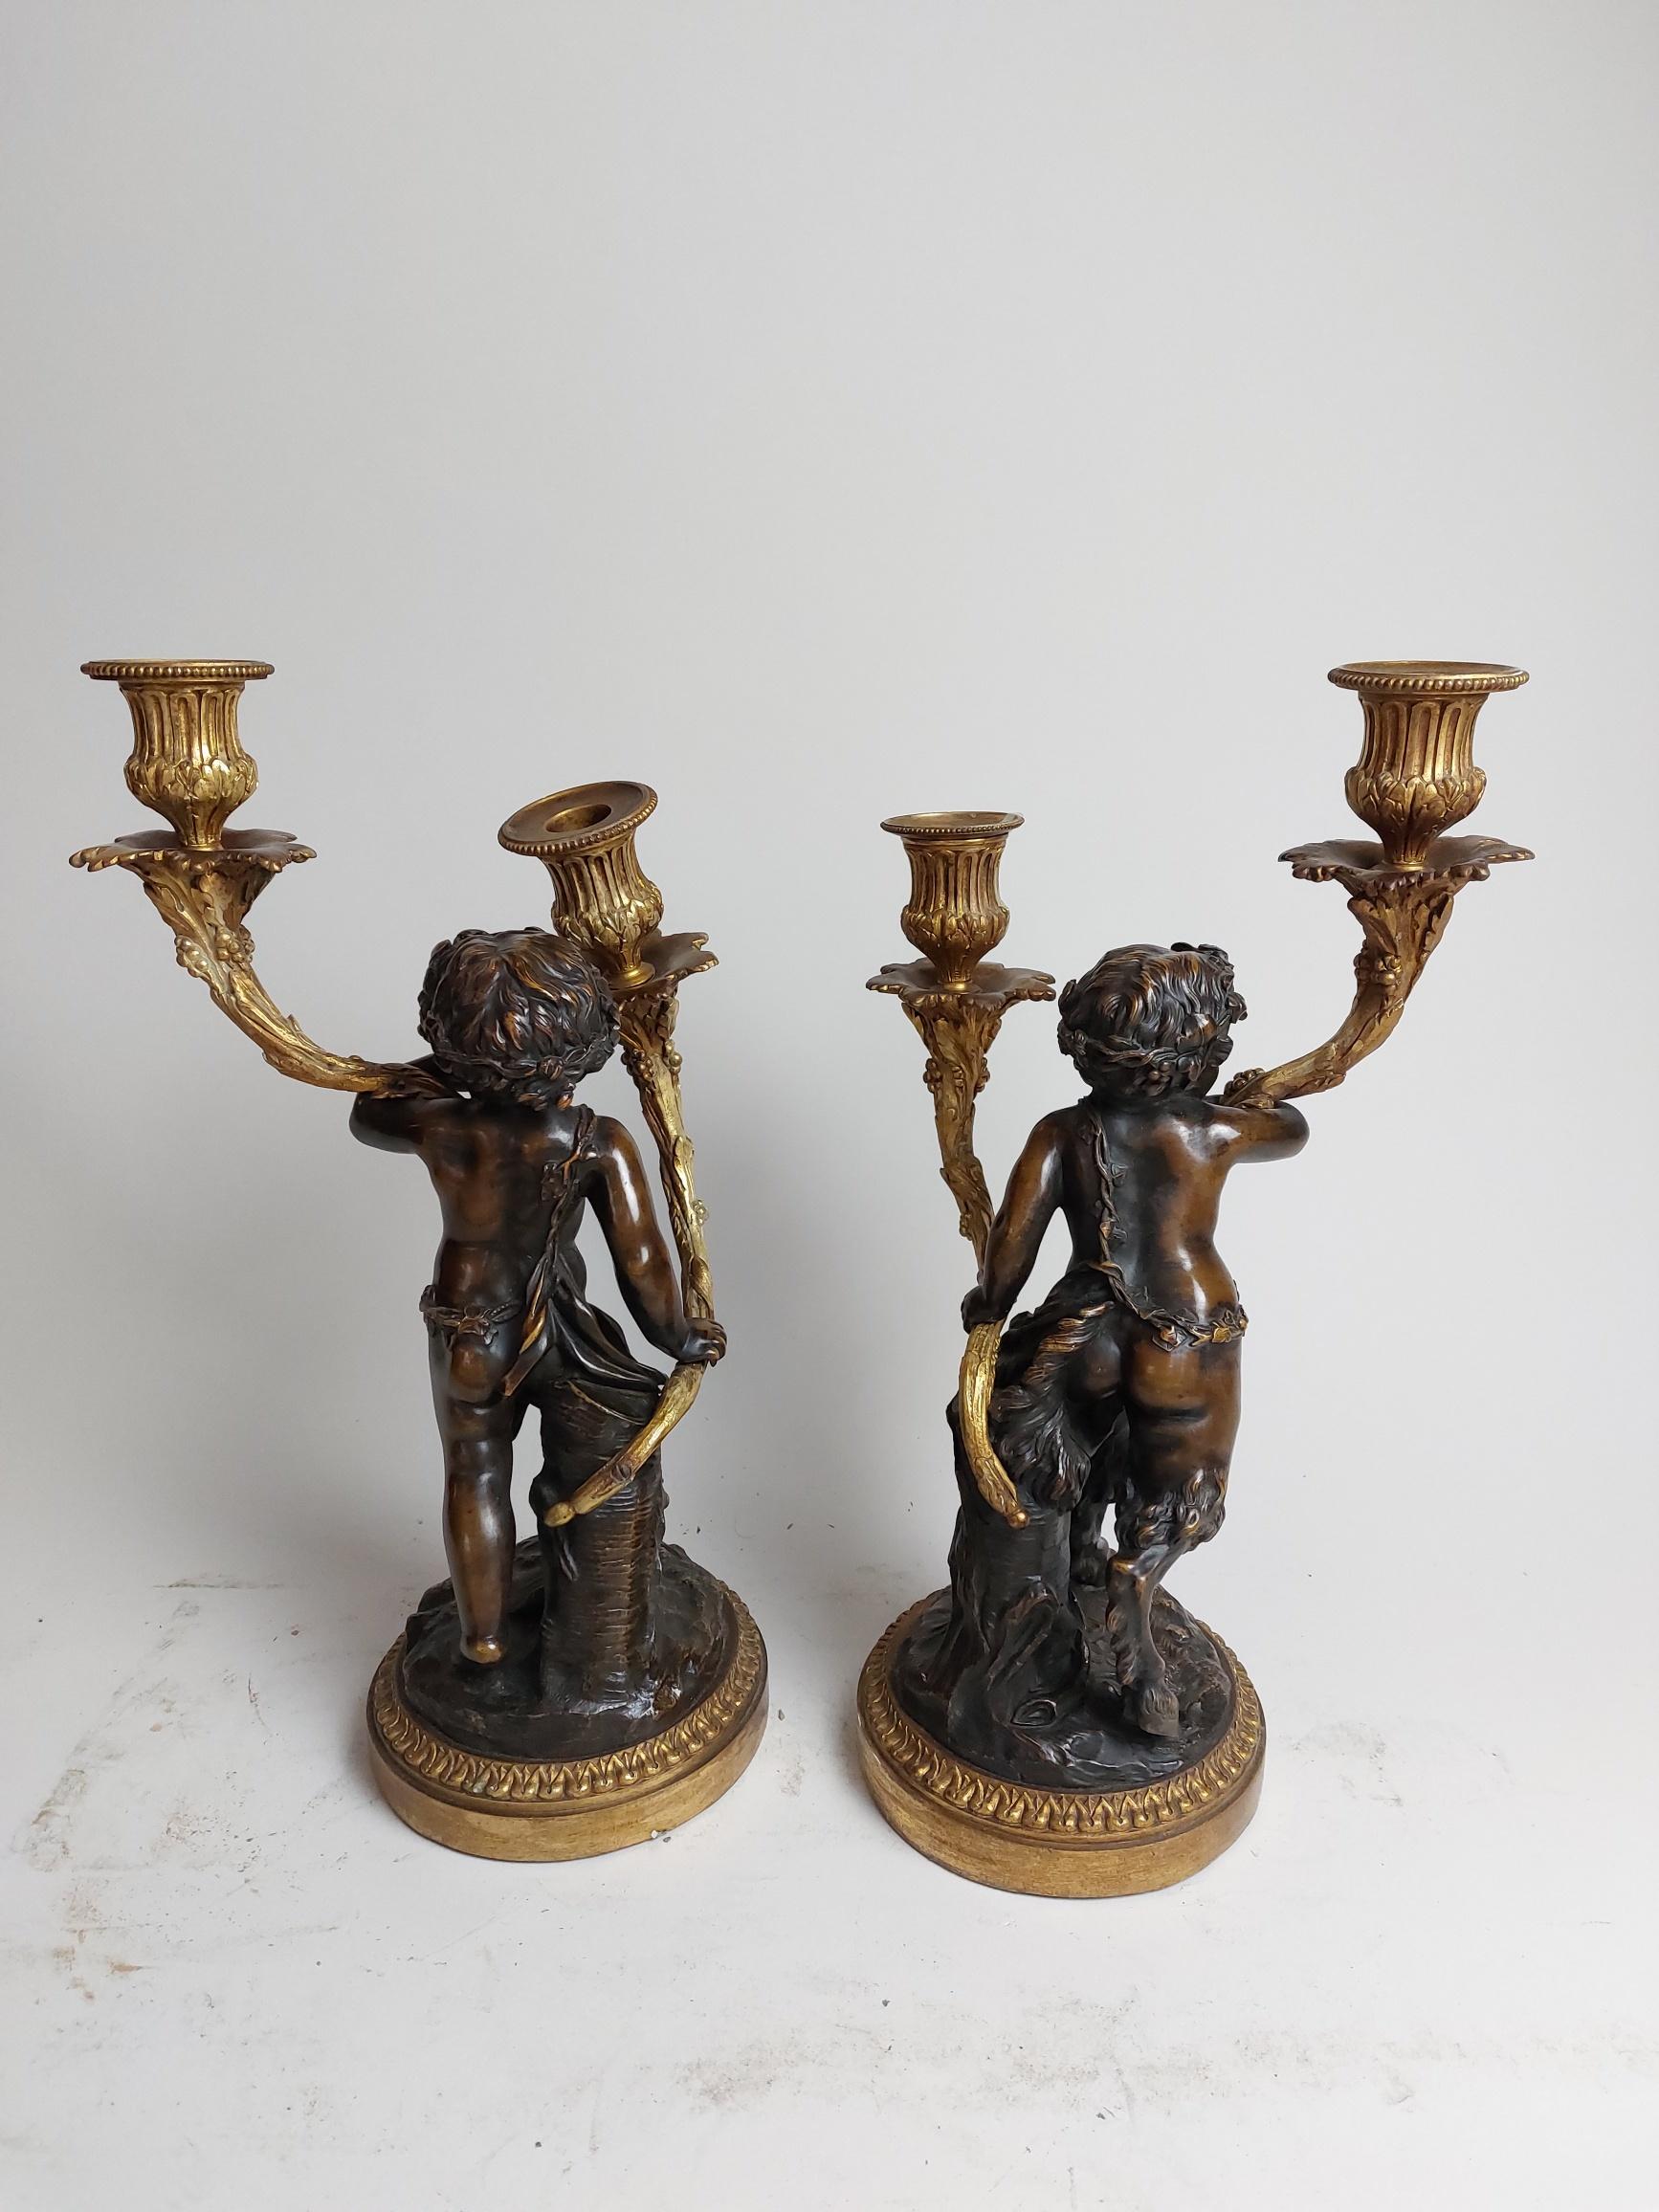 Cast Pair of 19th Century Ormolu Candlestick Holders Held by Bronze Fawns/Cherubs For Sale